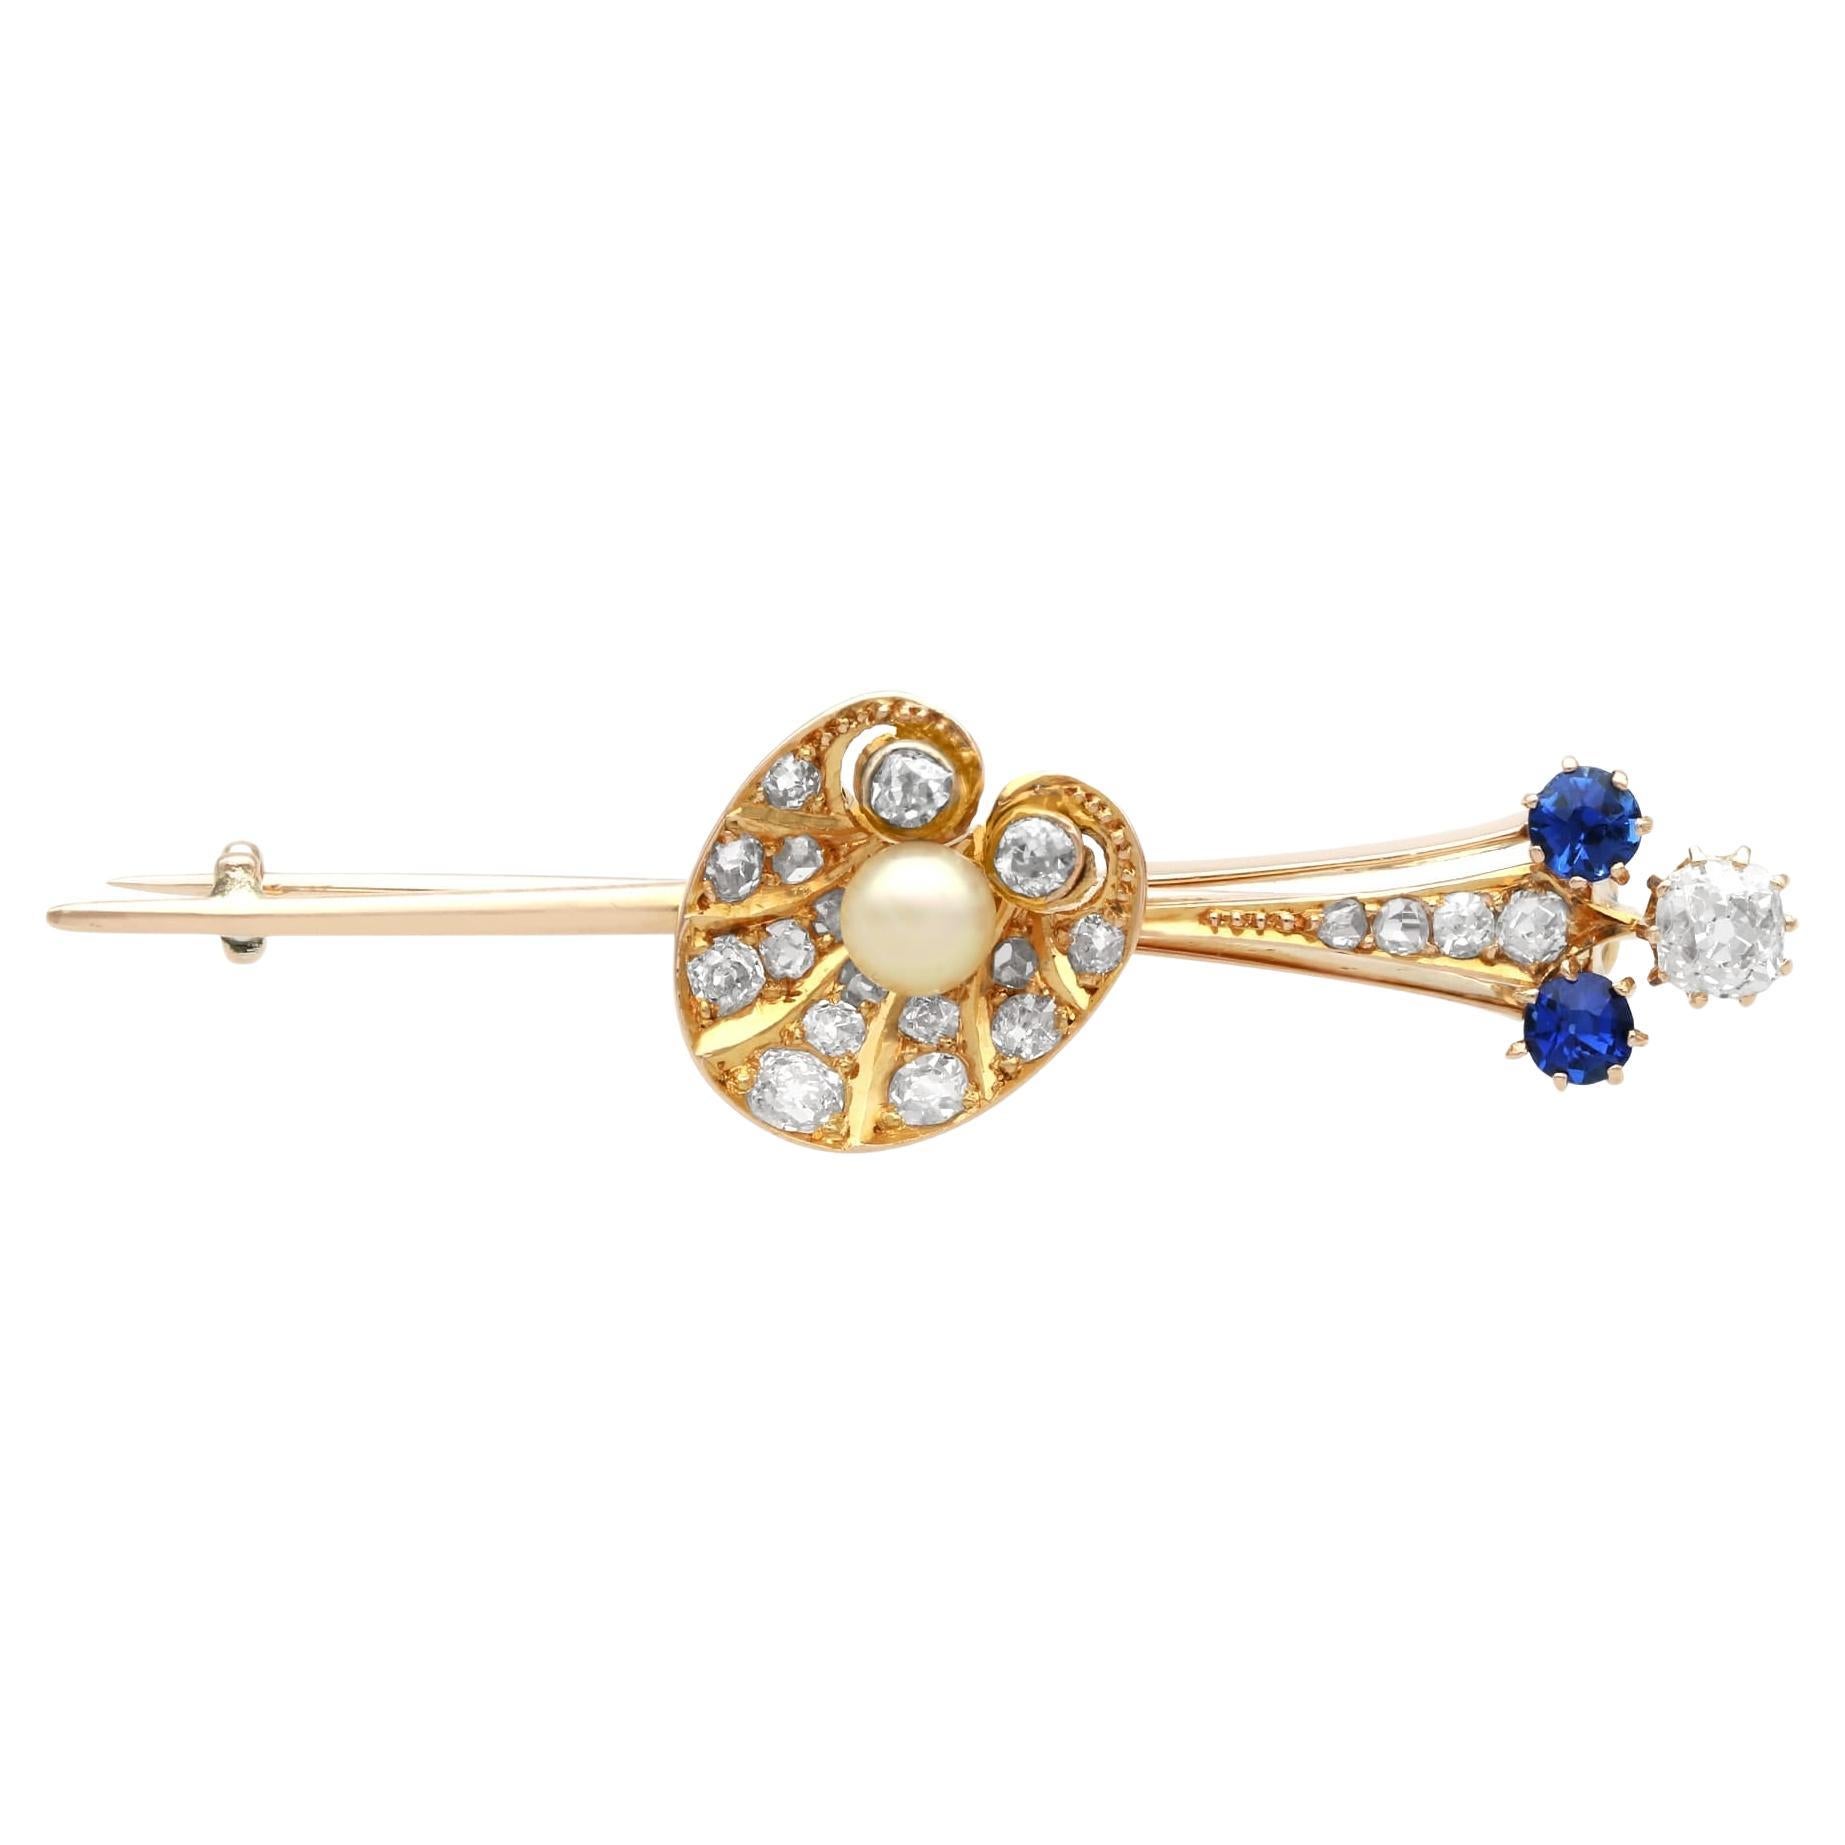 Antique Diamond, Sapphire, Pearl and 12k Yellow Gold Shell Bar Brooch Circa 1900 For Sale